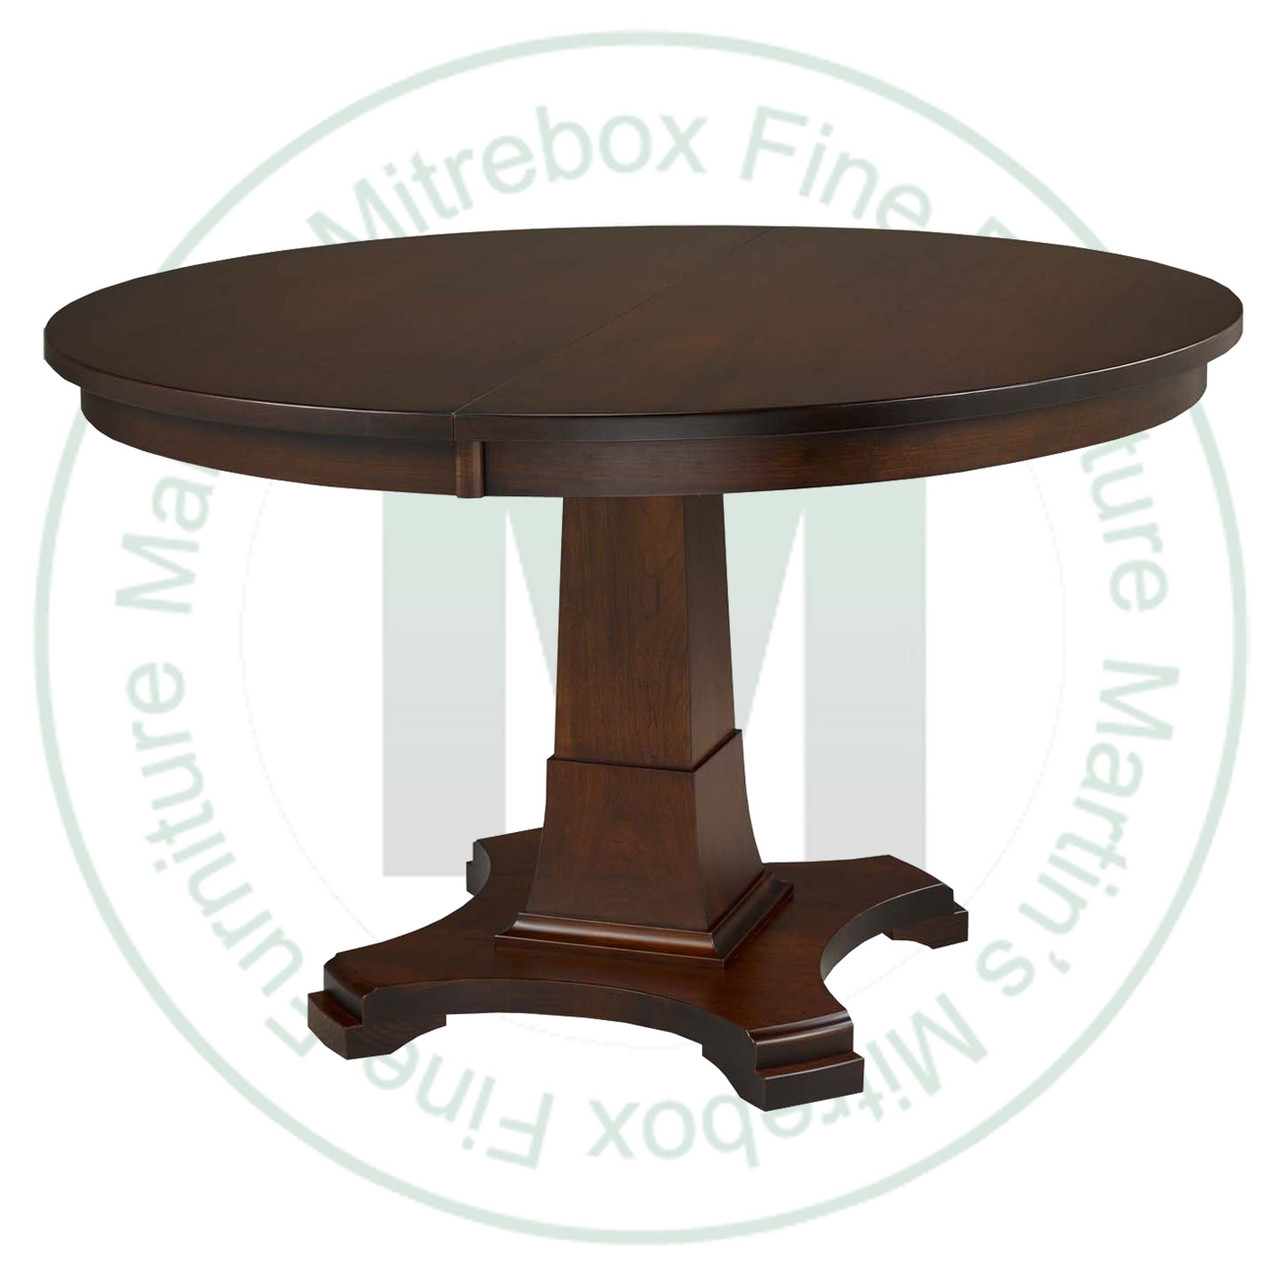 Oak Abbey Single Pedestal Table 36''D x 36''W x 30''H With 2 - 12'' Leaves. Table Has 1.25'' Thick Top